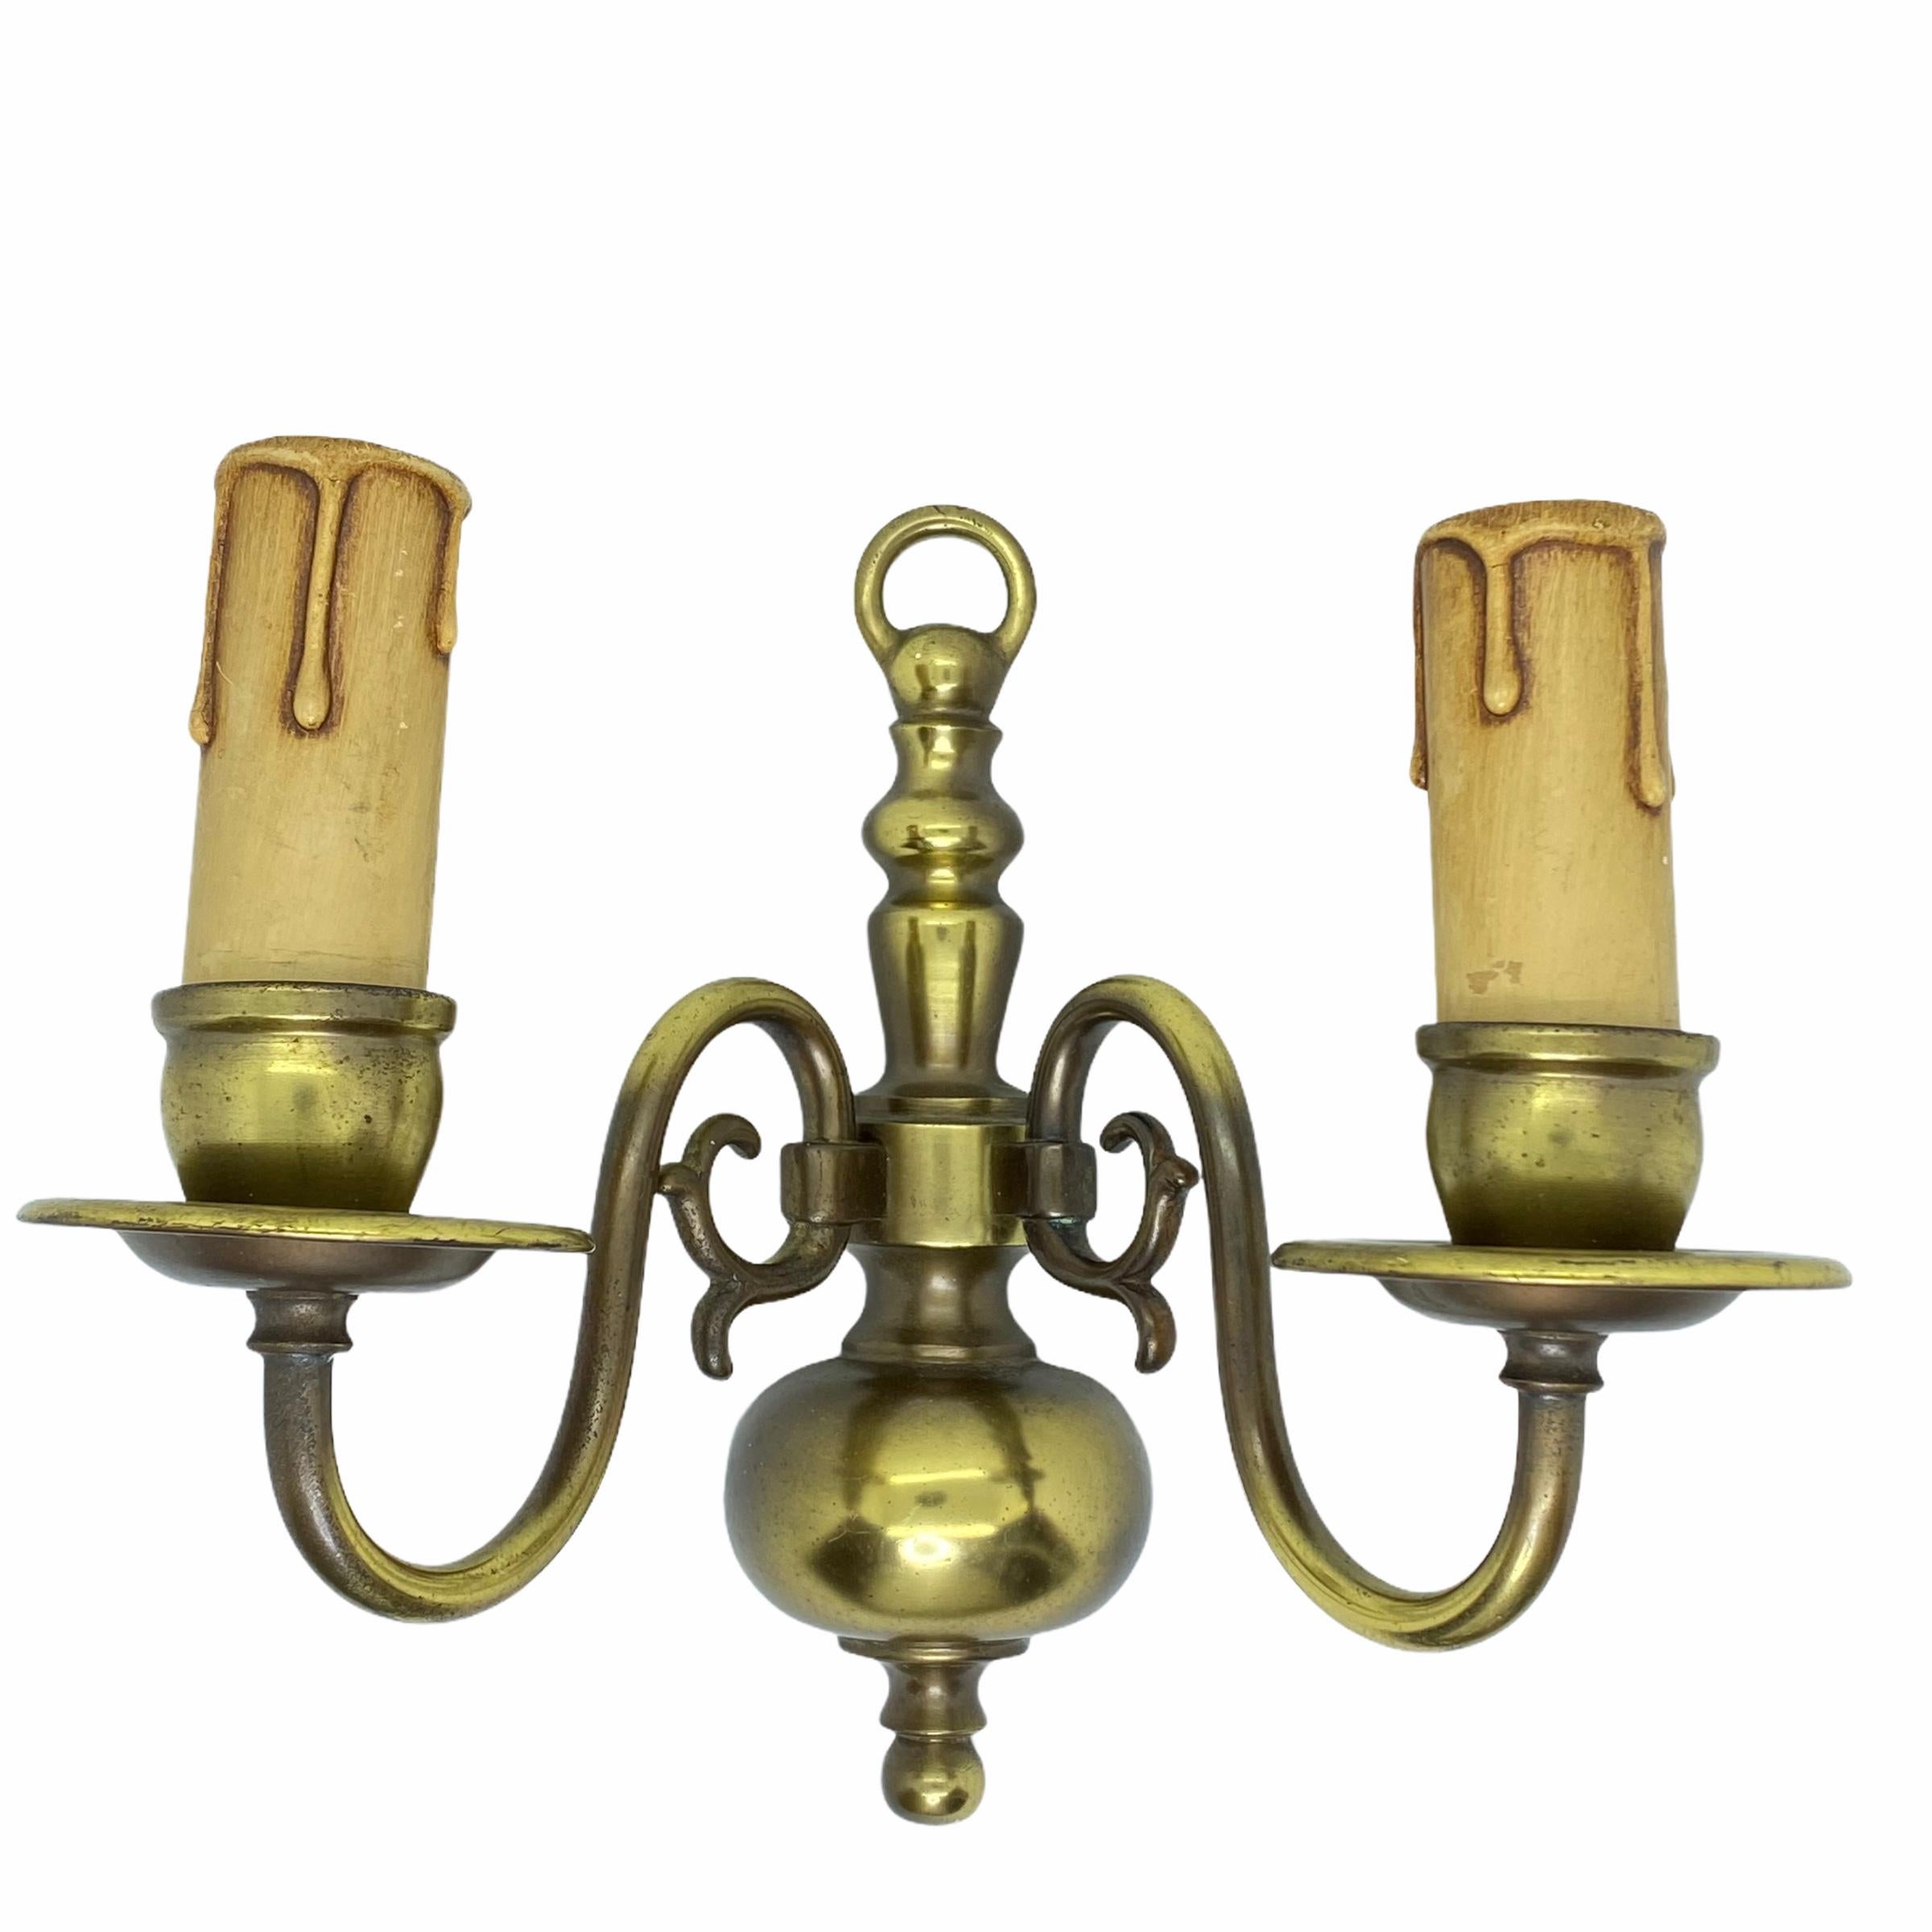 A stunning pair of heavy brass wall sconces. Each consisting of a stylish Farmhouse style design. Each fixture requires two European E14 / 110 Volt candelabra bulbs, each bulb up to 40 watts.